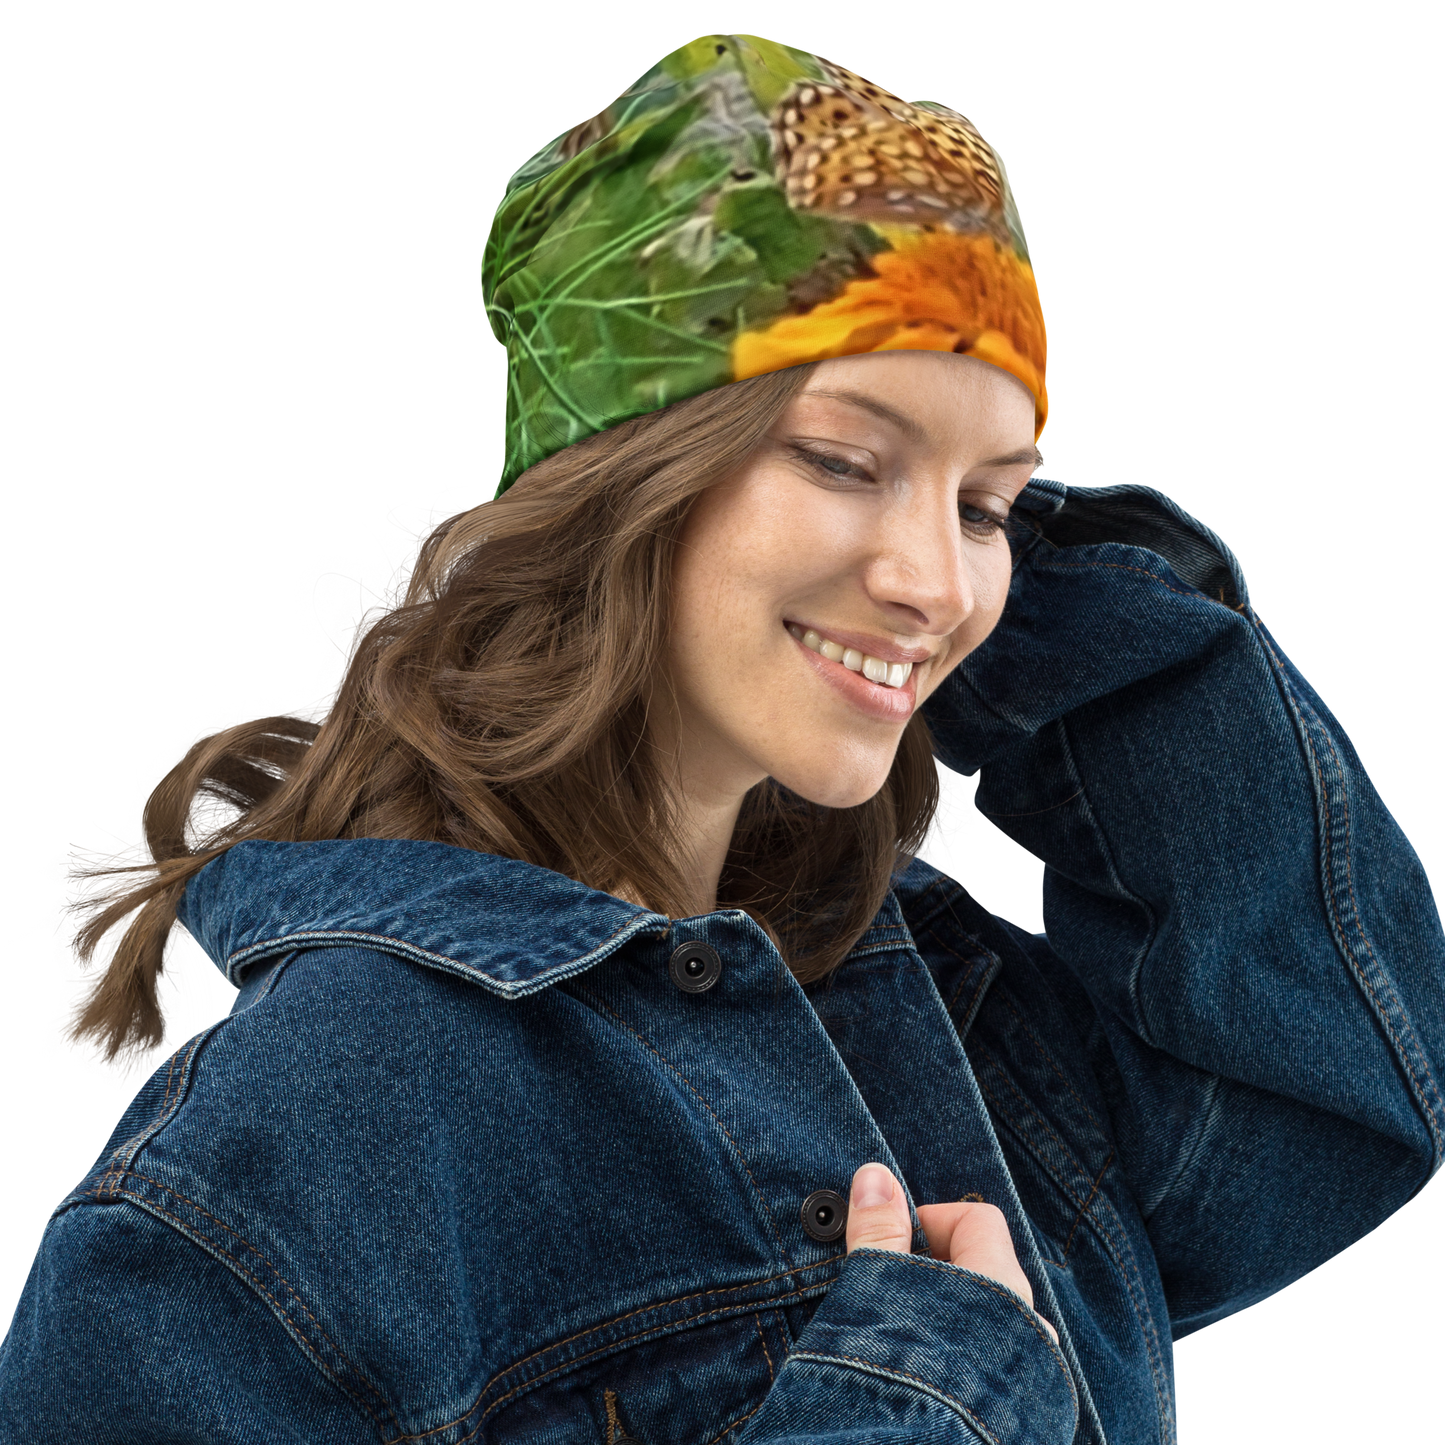 The FLOWER LOVE Collection - "Butterfly on a Bloom" Design Beanie - Lightweight, Cute Chemo Hat